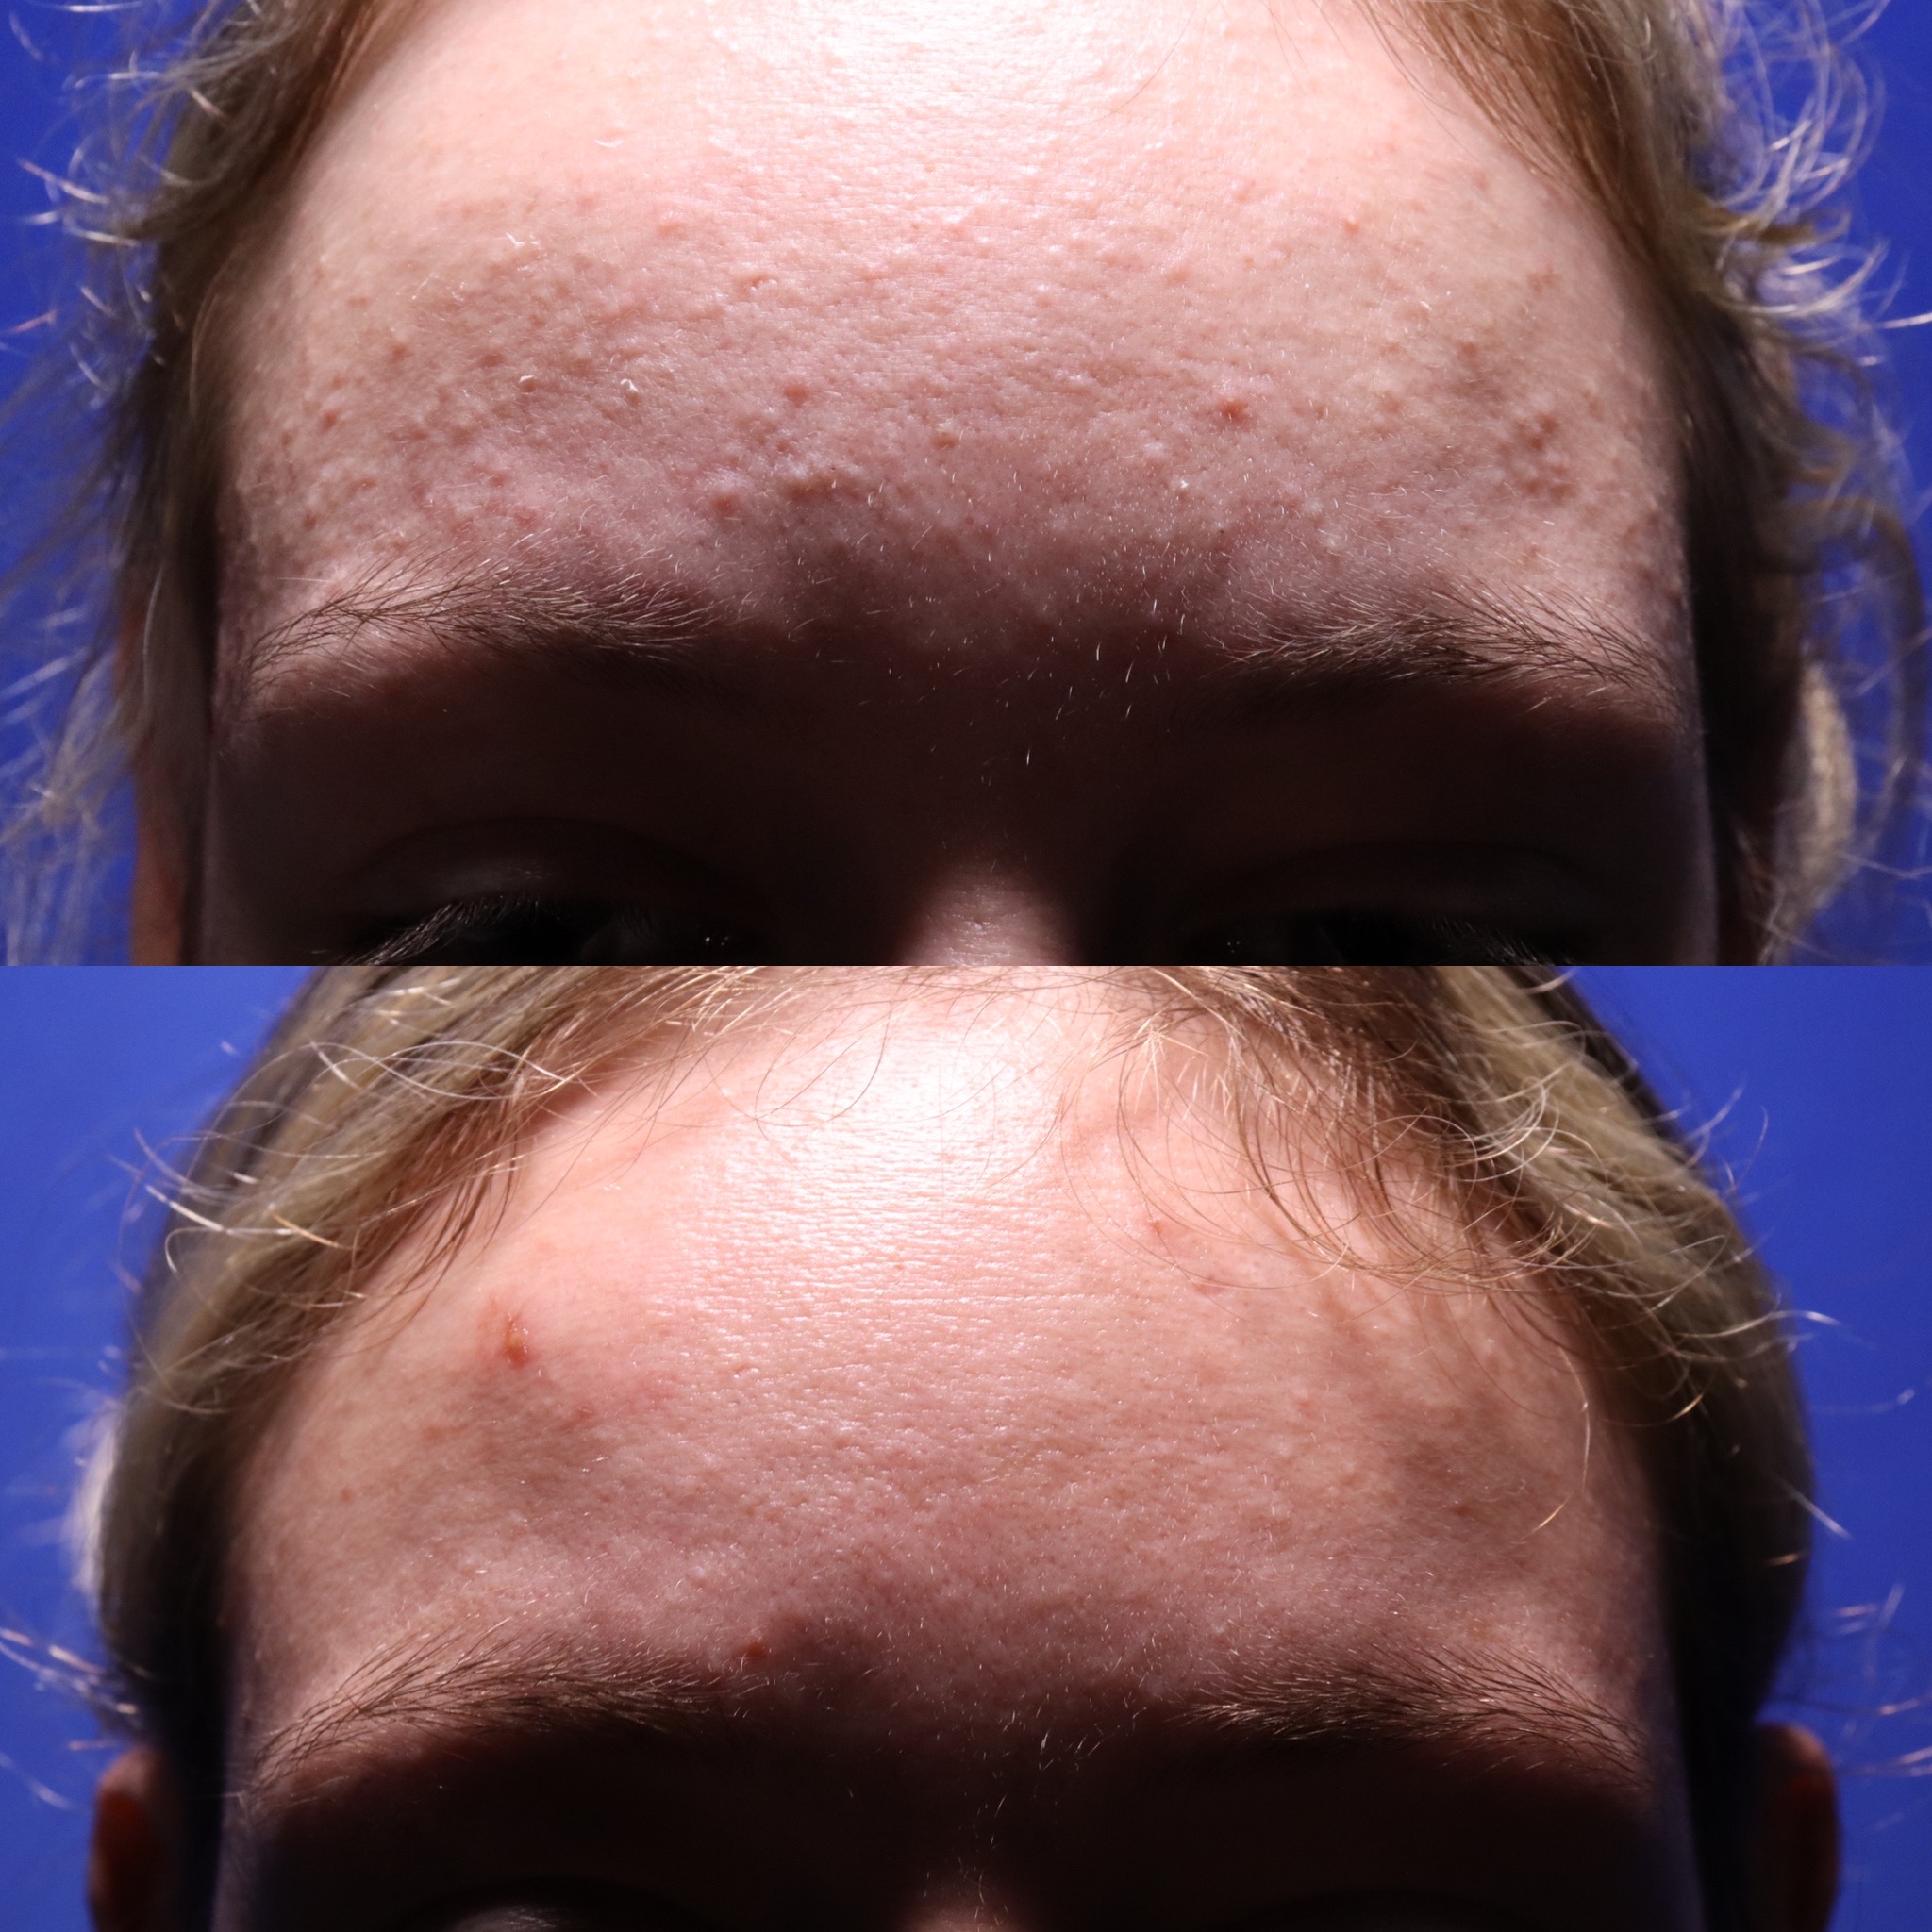 BB, SHI 4 Non Acne Scarring Active Acne Patient Results